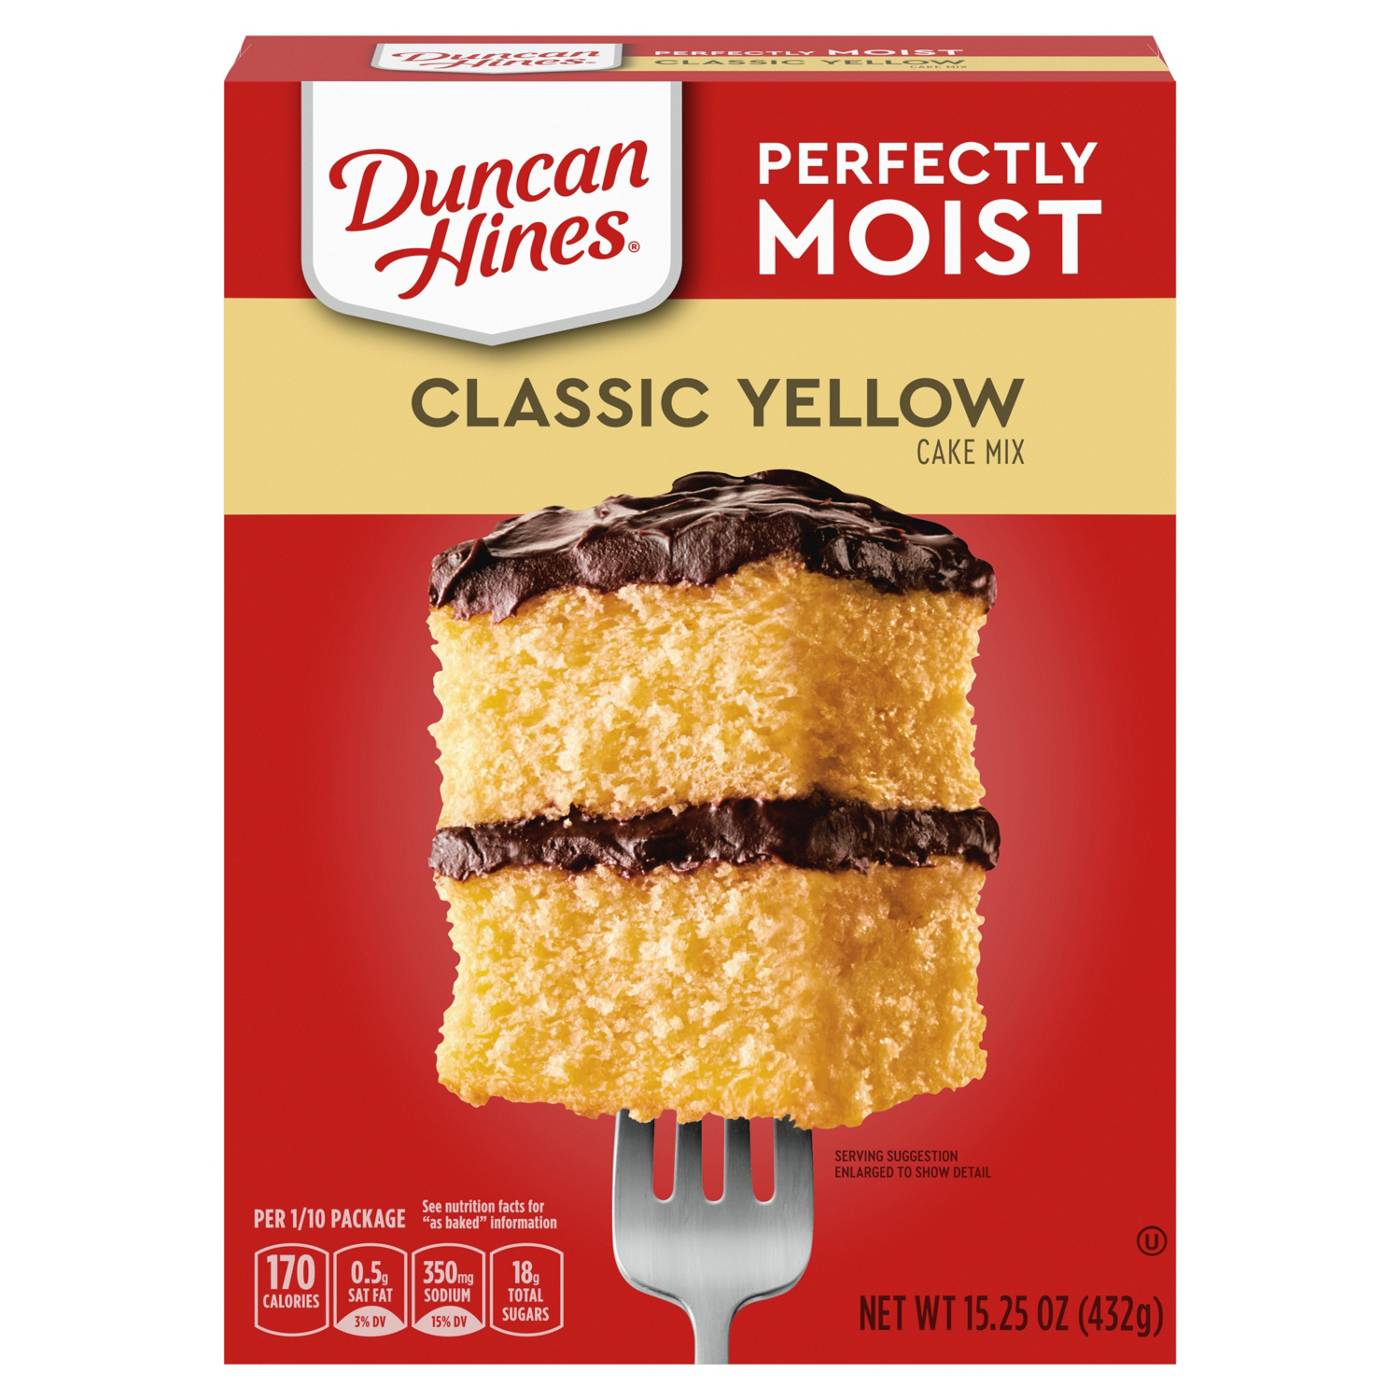 Duncan Hines Perfectly Moist Classic Yellow Cake Mix; image 1 of 4